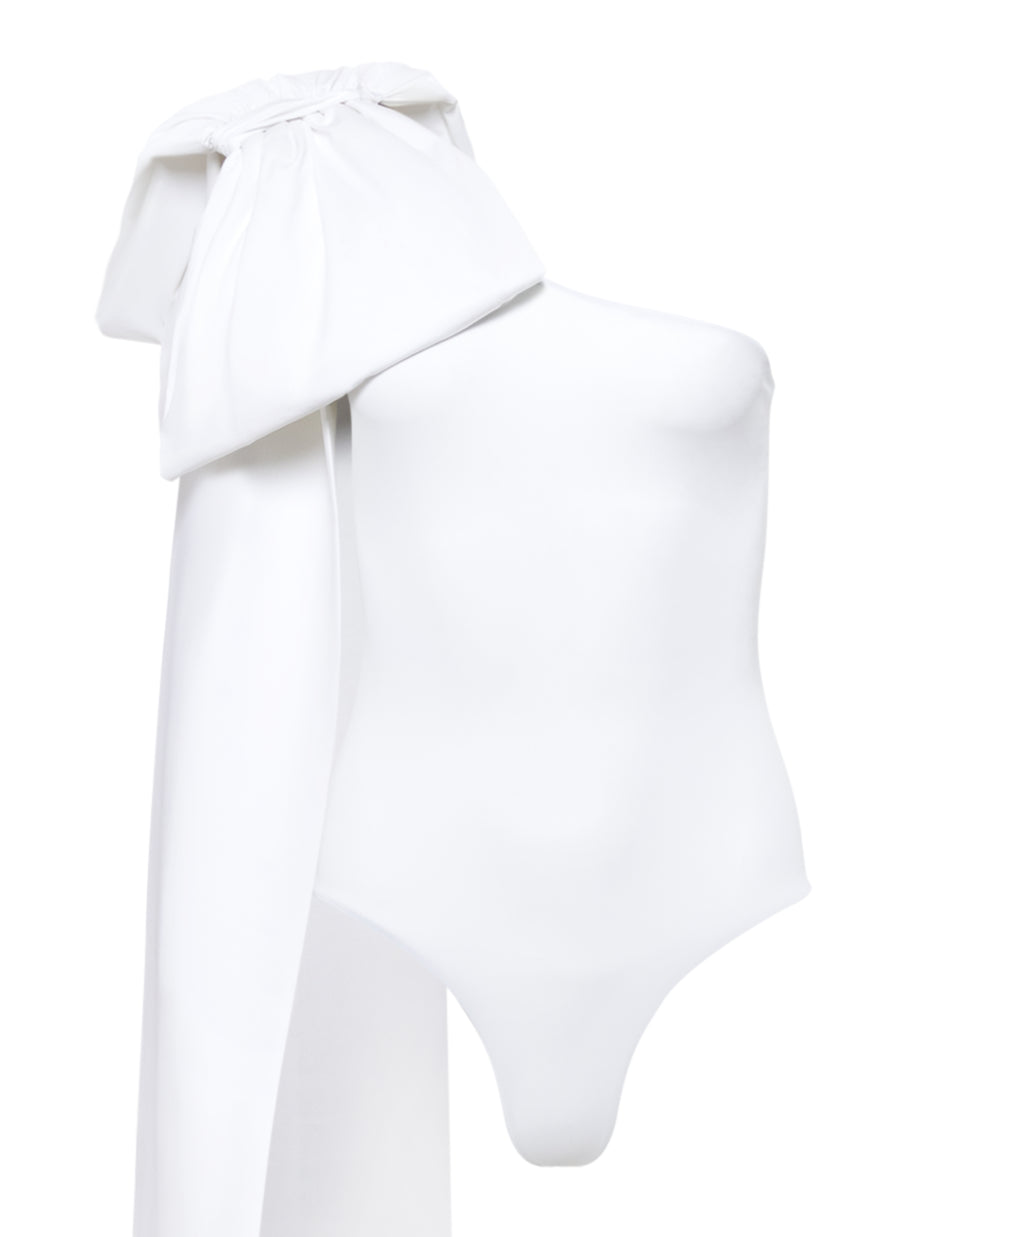 Milly White One-Piece With White Bow